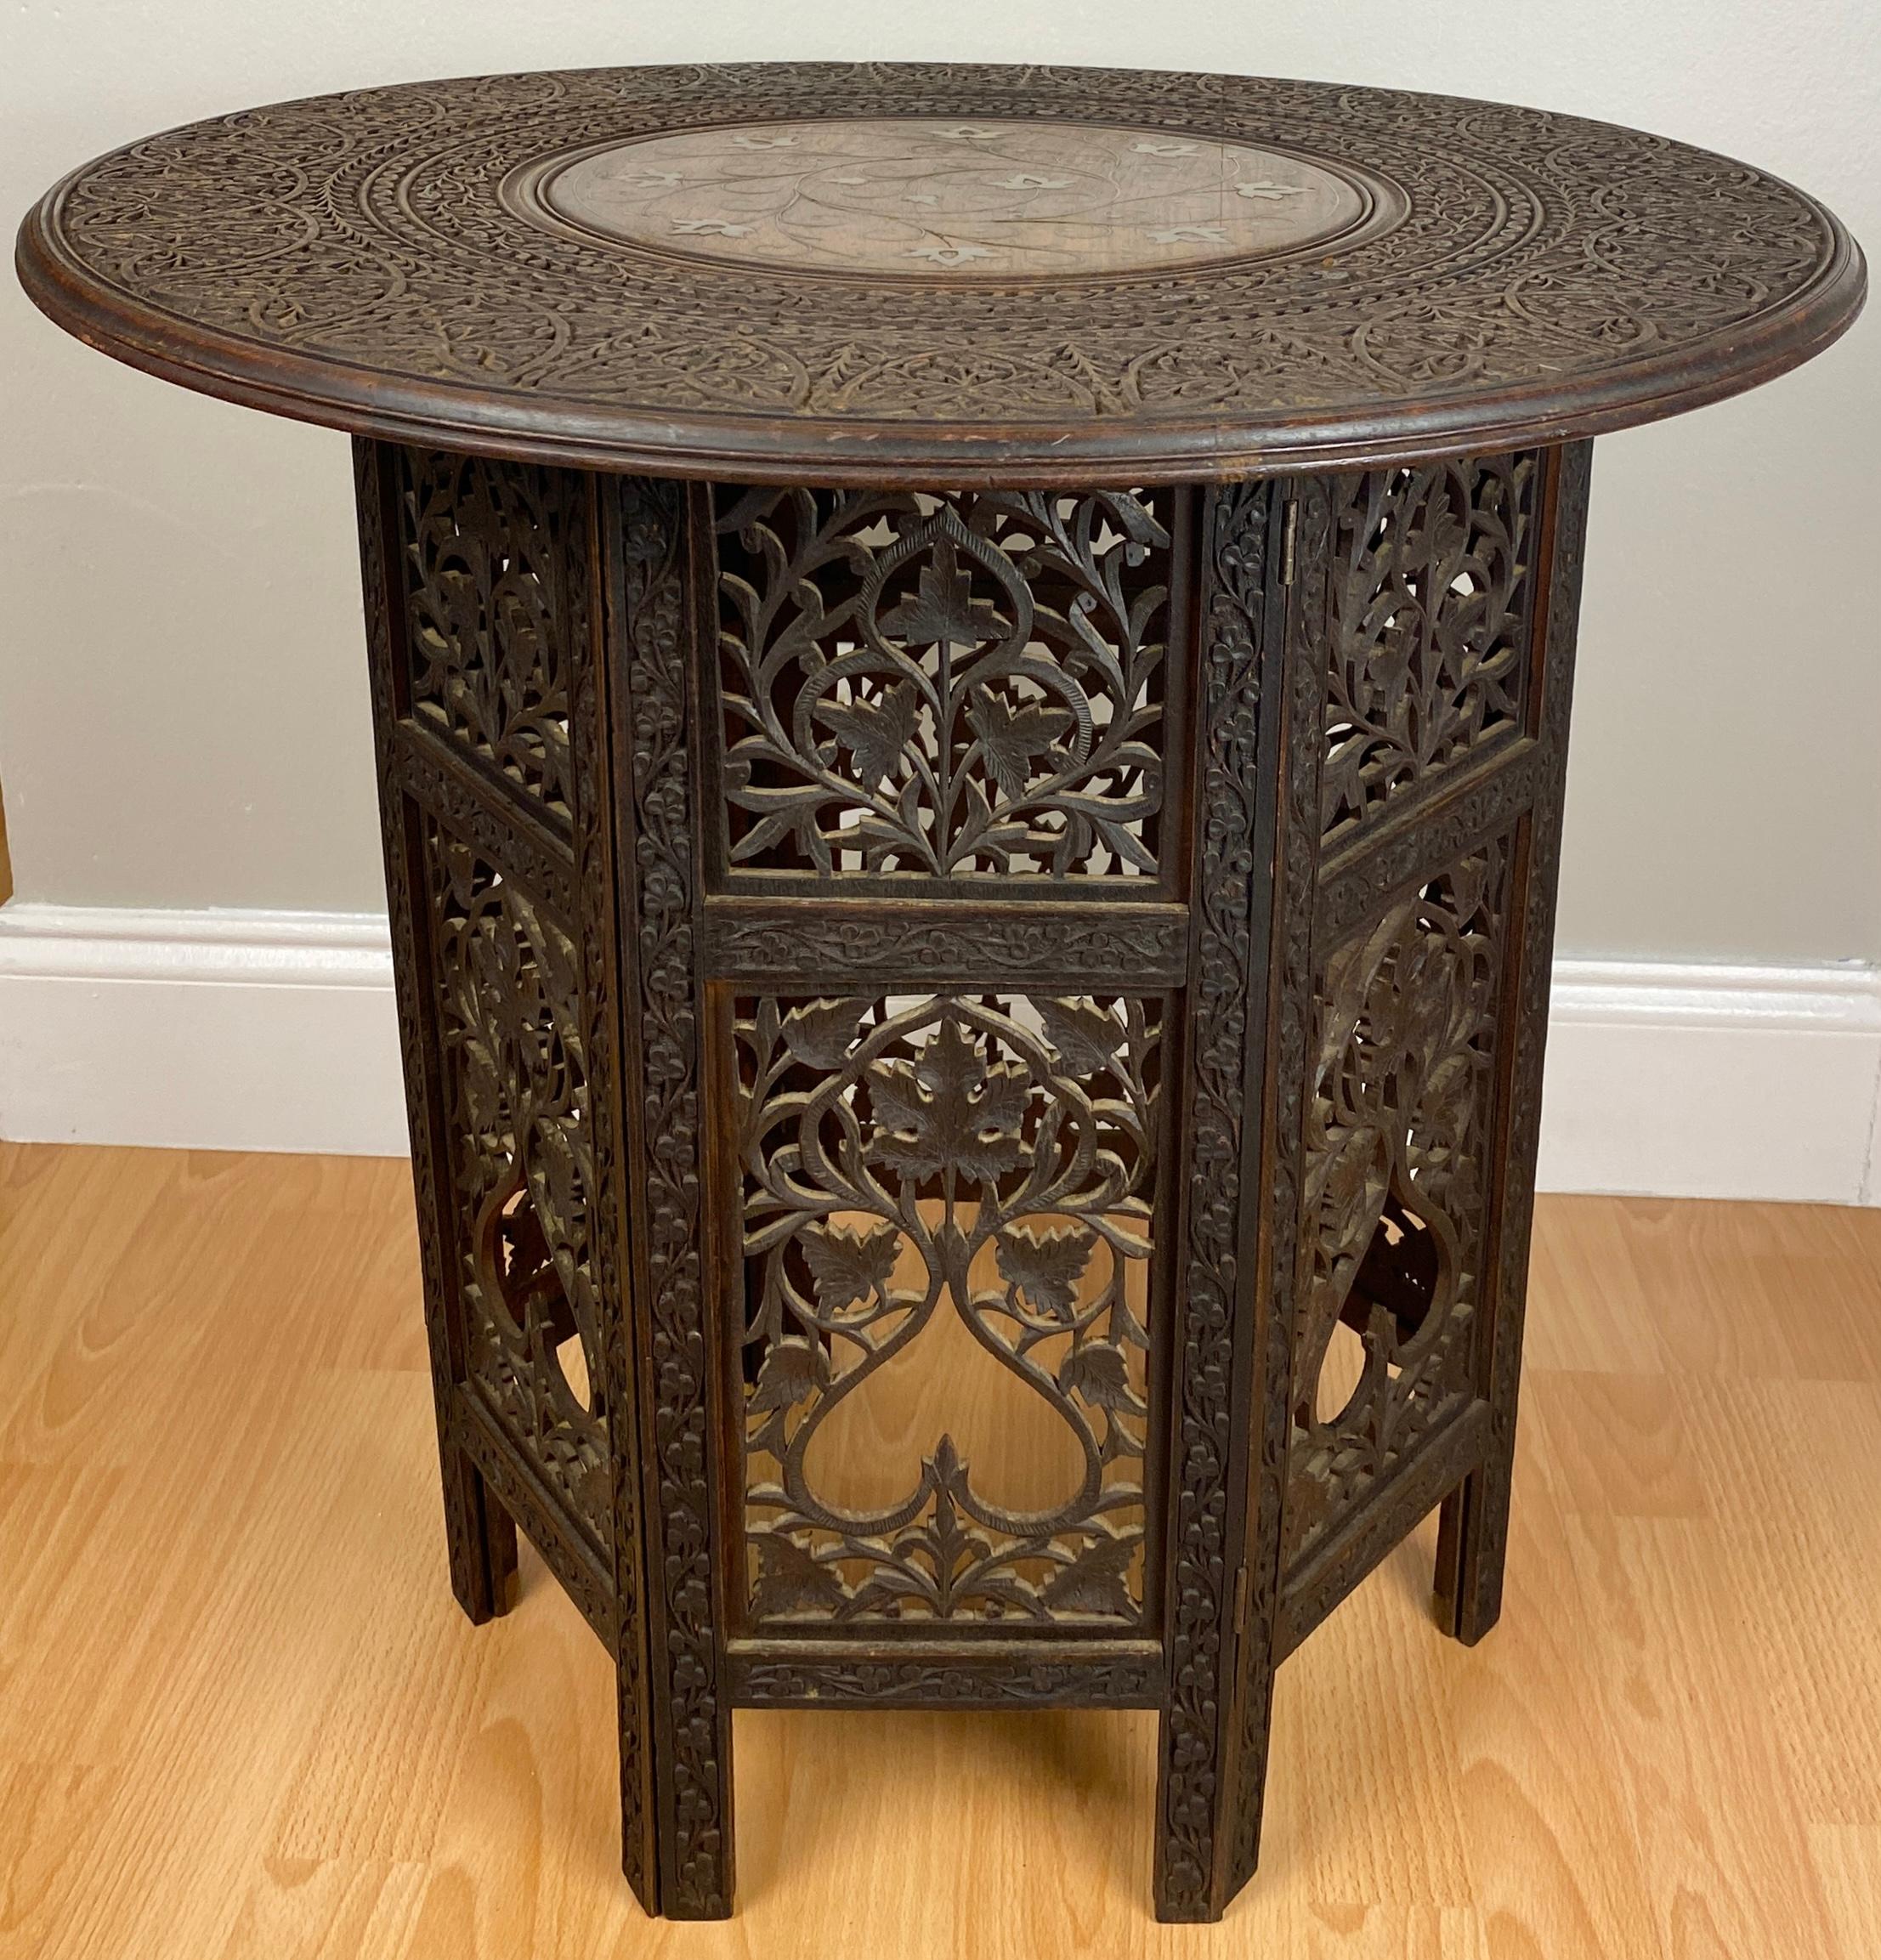 Intricately hand carved, antique Moroccan side table crafted in walnut wood having a round top inlaid with copper floral patterns in the Style of the Ottomans. Highlighted above the six sided base with Moorish arches design that allows the viewer to